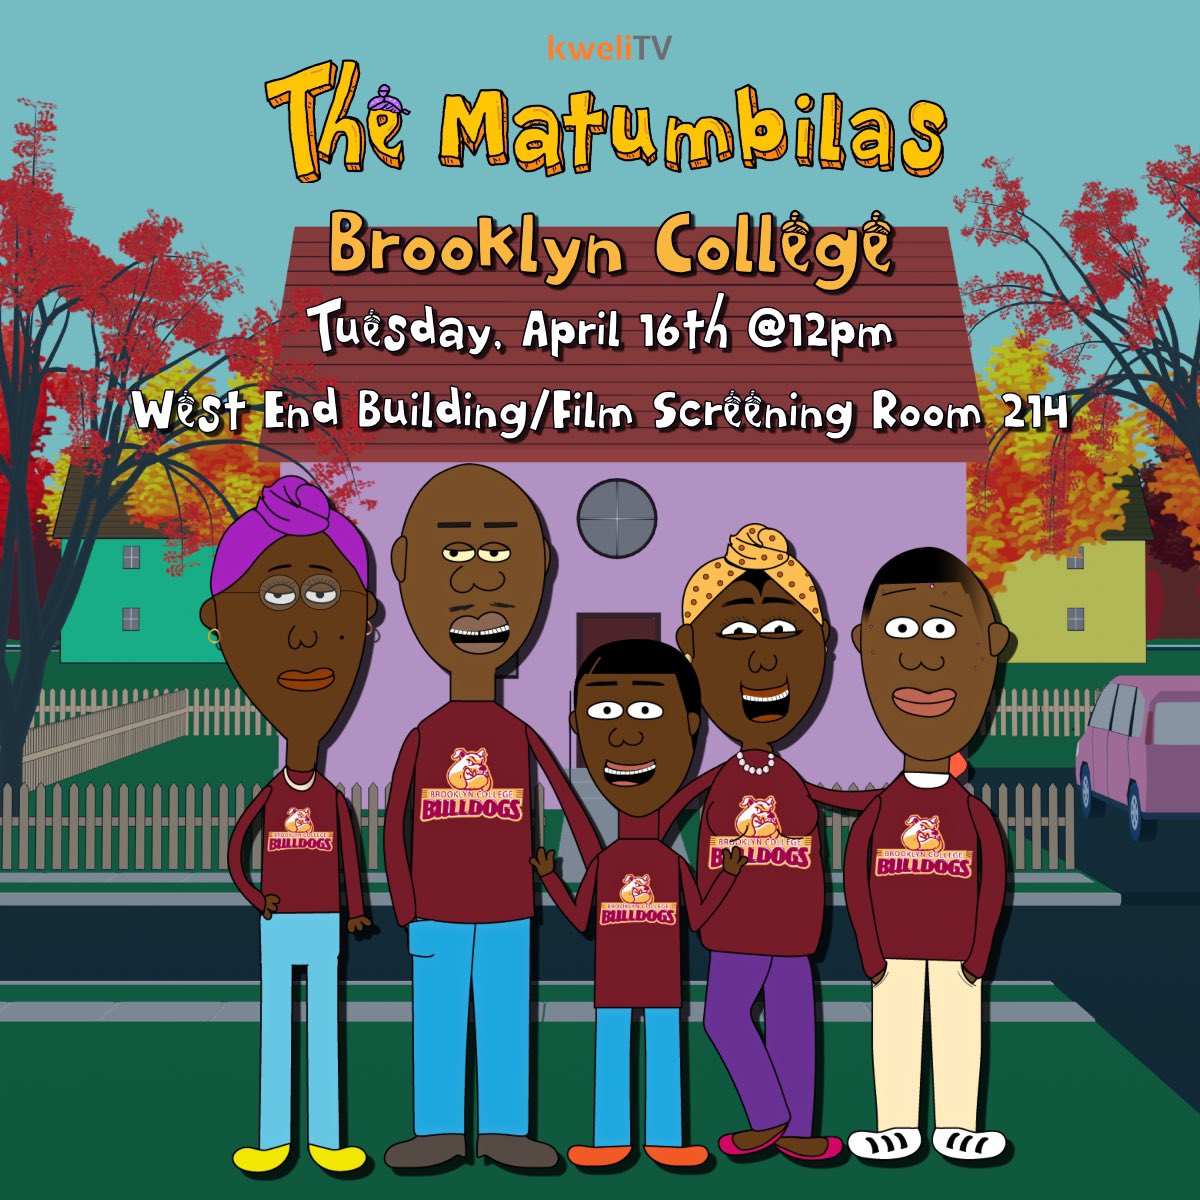 The Matumbilas are taking the 2 Train and heading to @BklynCollege411 for another screening event! Hope to see you there 🙌📺